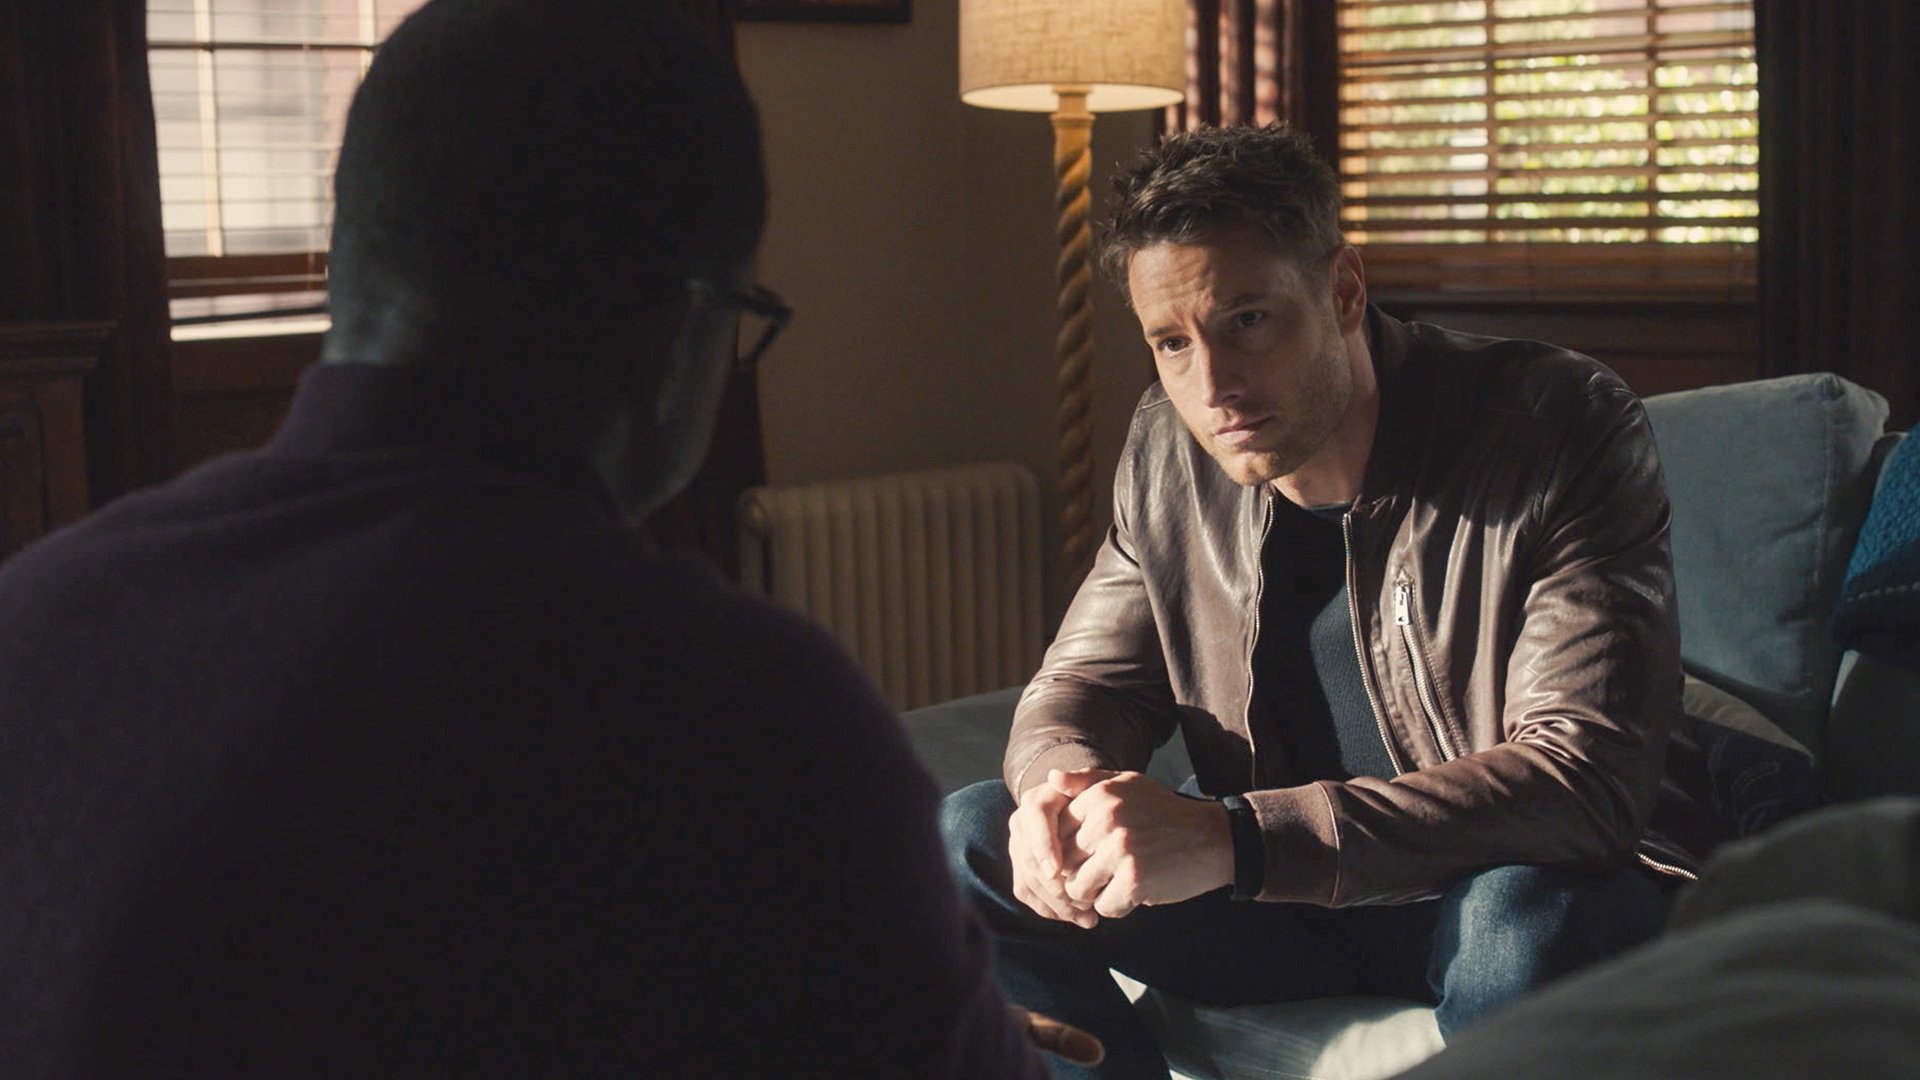 Sterling K. Brown as Randall Pearson facing Justin Hartley as Kevin Pearson in ‘This Is Us’ Season 5 Episode 12